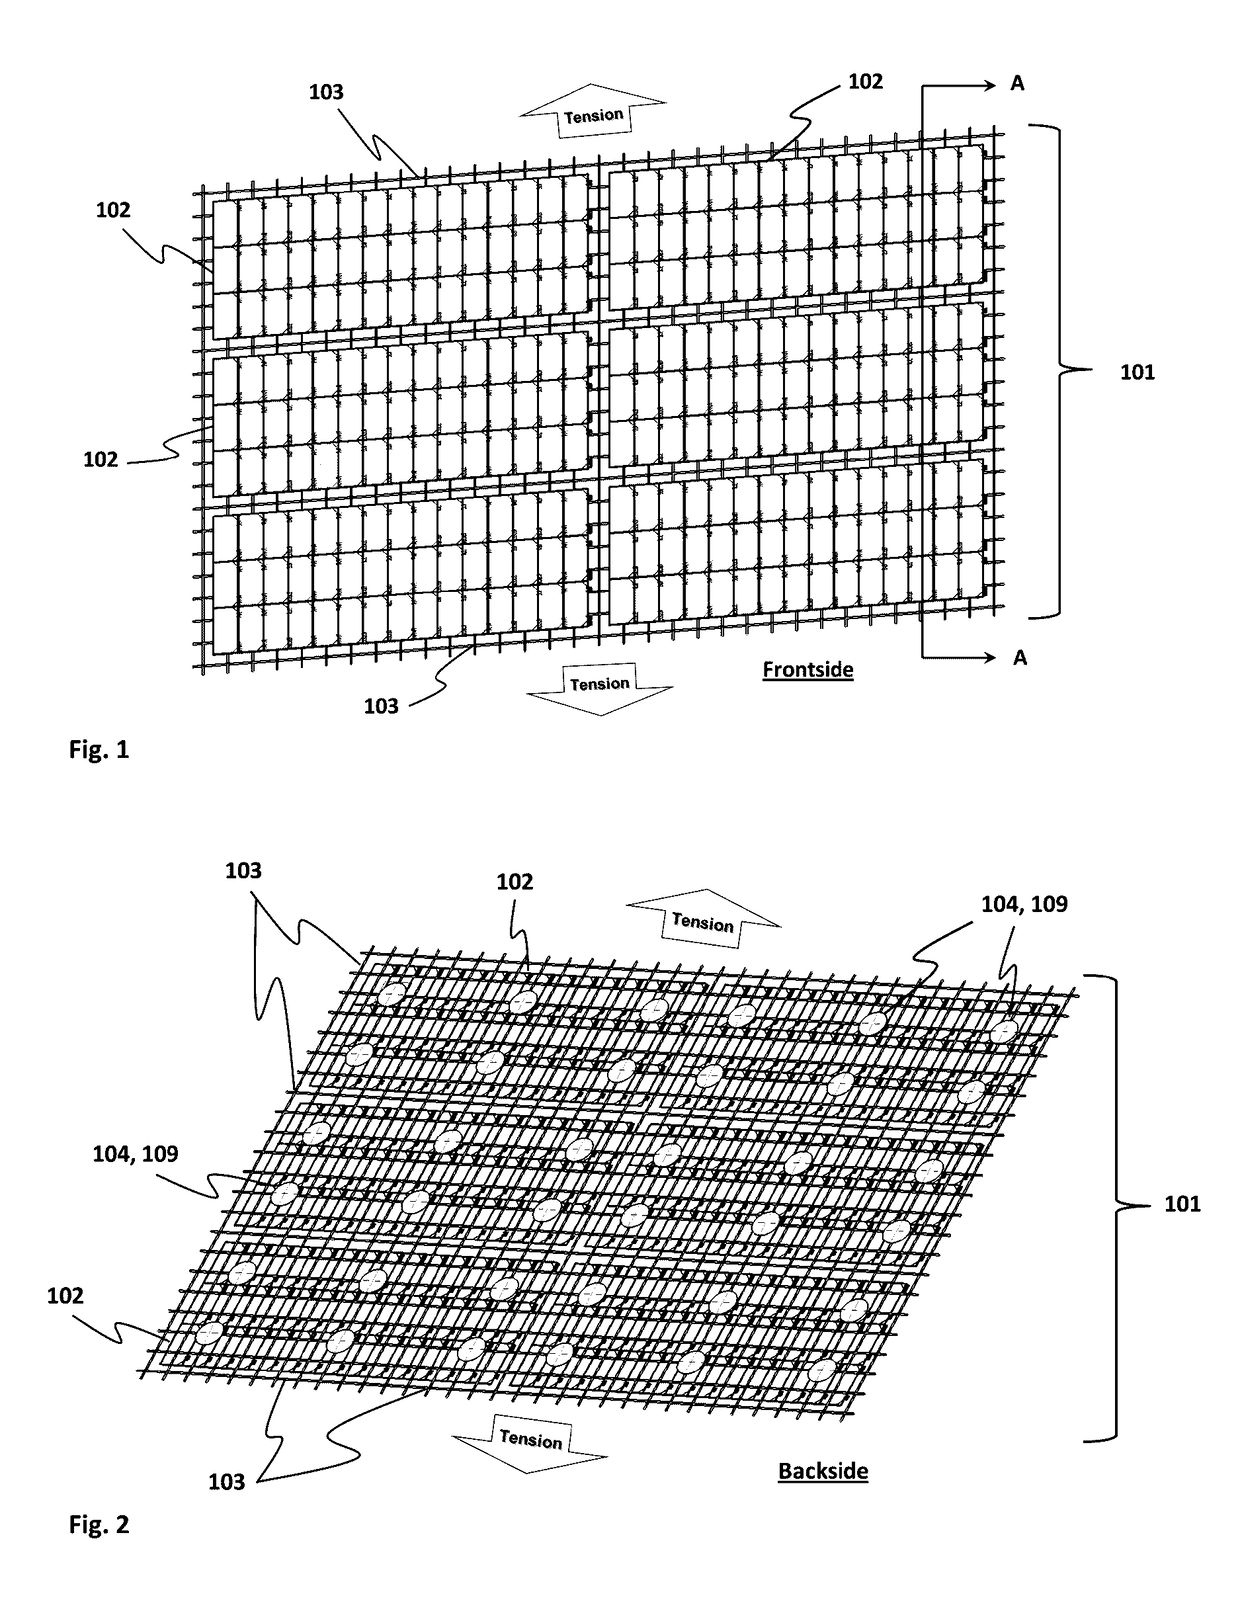 Integrated modular photovoltaic blanket assembly for space solar array